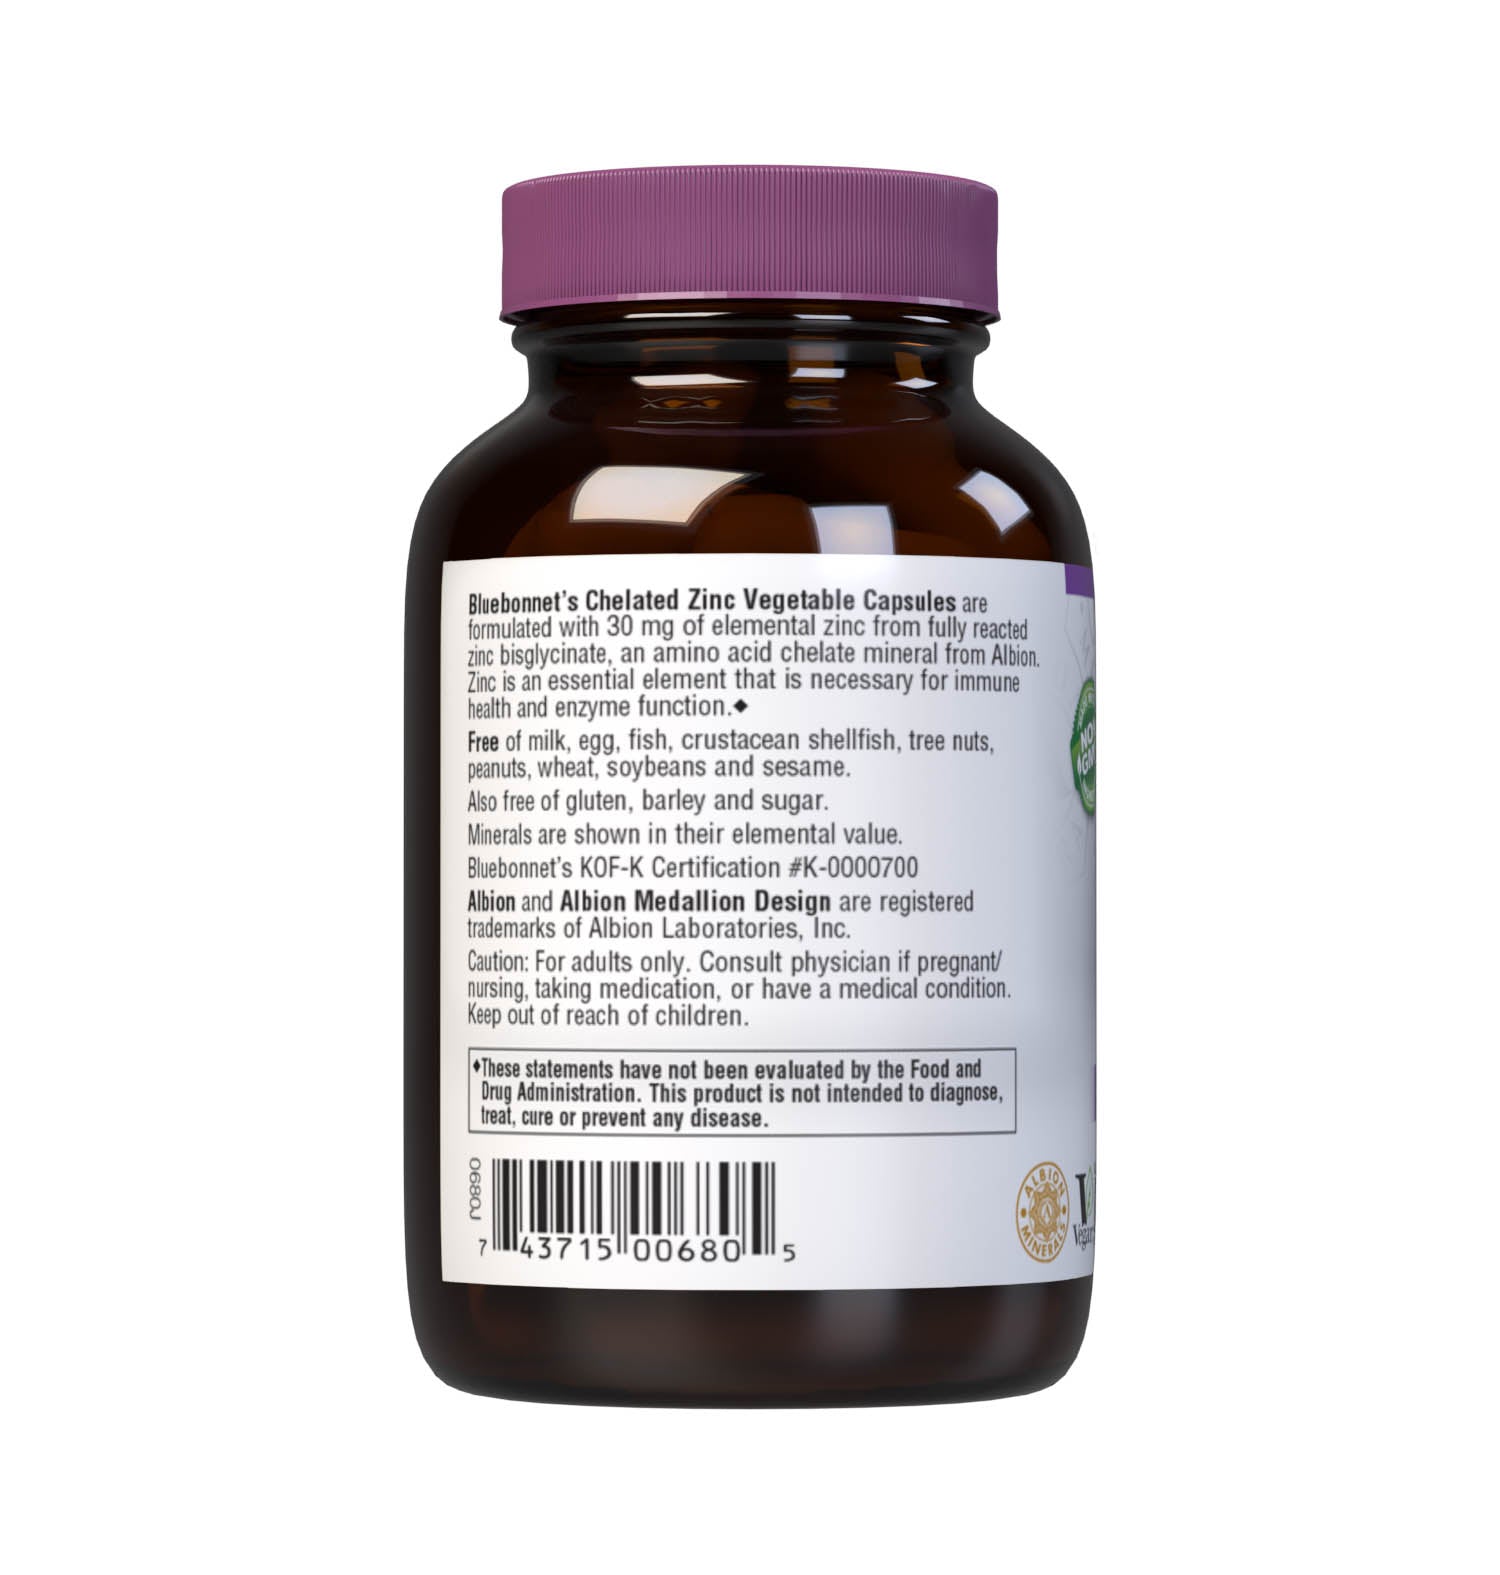 Bluebonnet's Chelated Zinc 90 Vegetable Capsules are formulated with 30 mg of elemental zinc from fully reacted zinc bisglycinate, an amino acid chelate mineral from Albion. Zinc is an essential element that is necessary for immune health and enzyme function. Description panel. #size_90 count